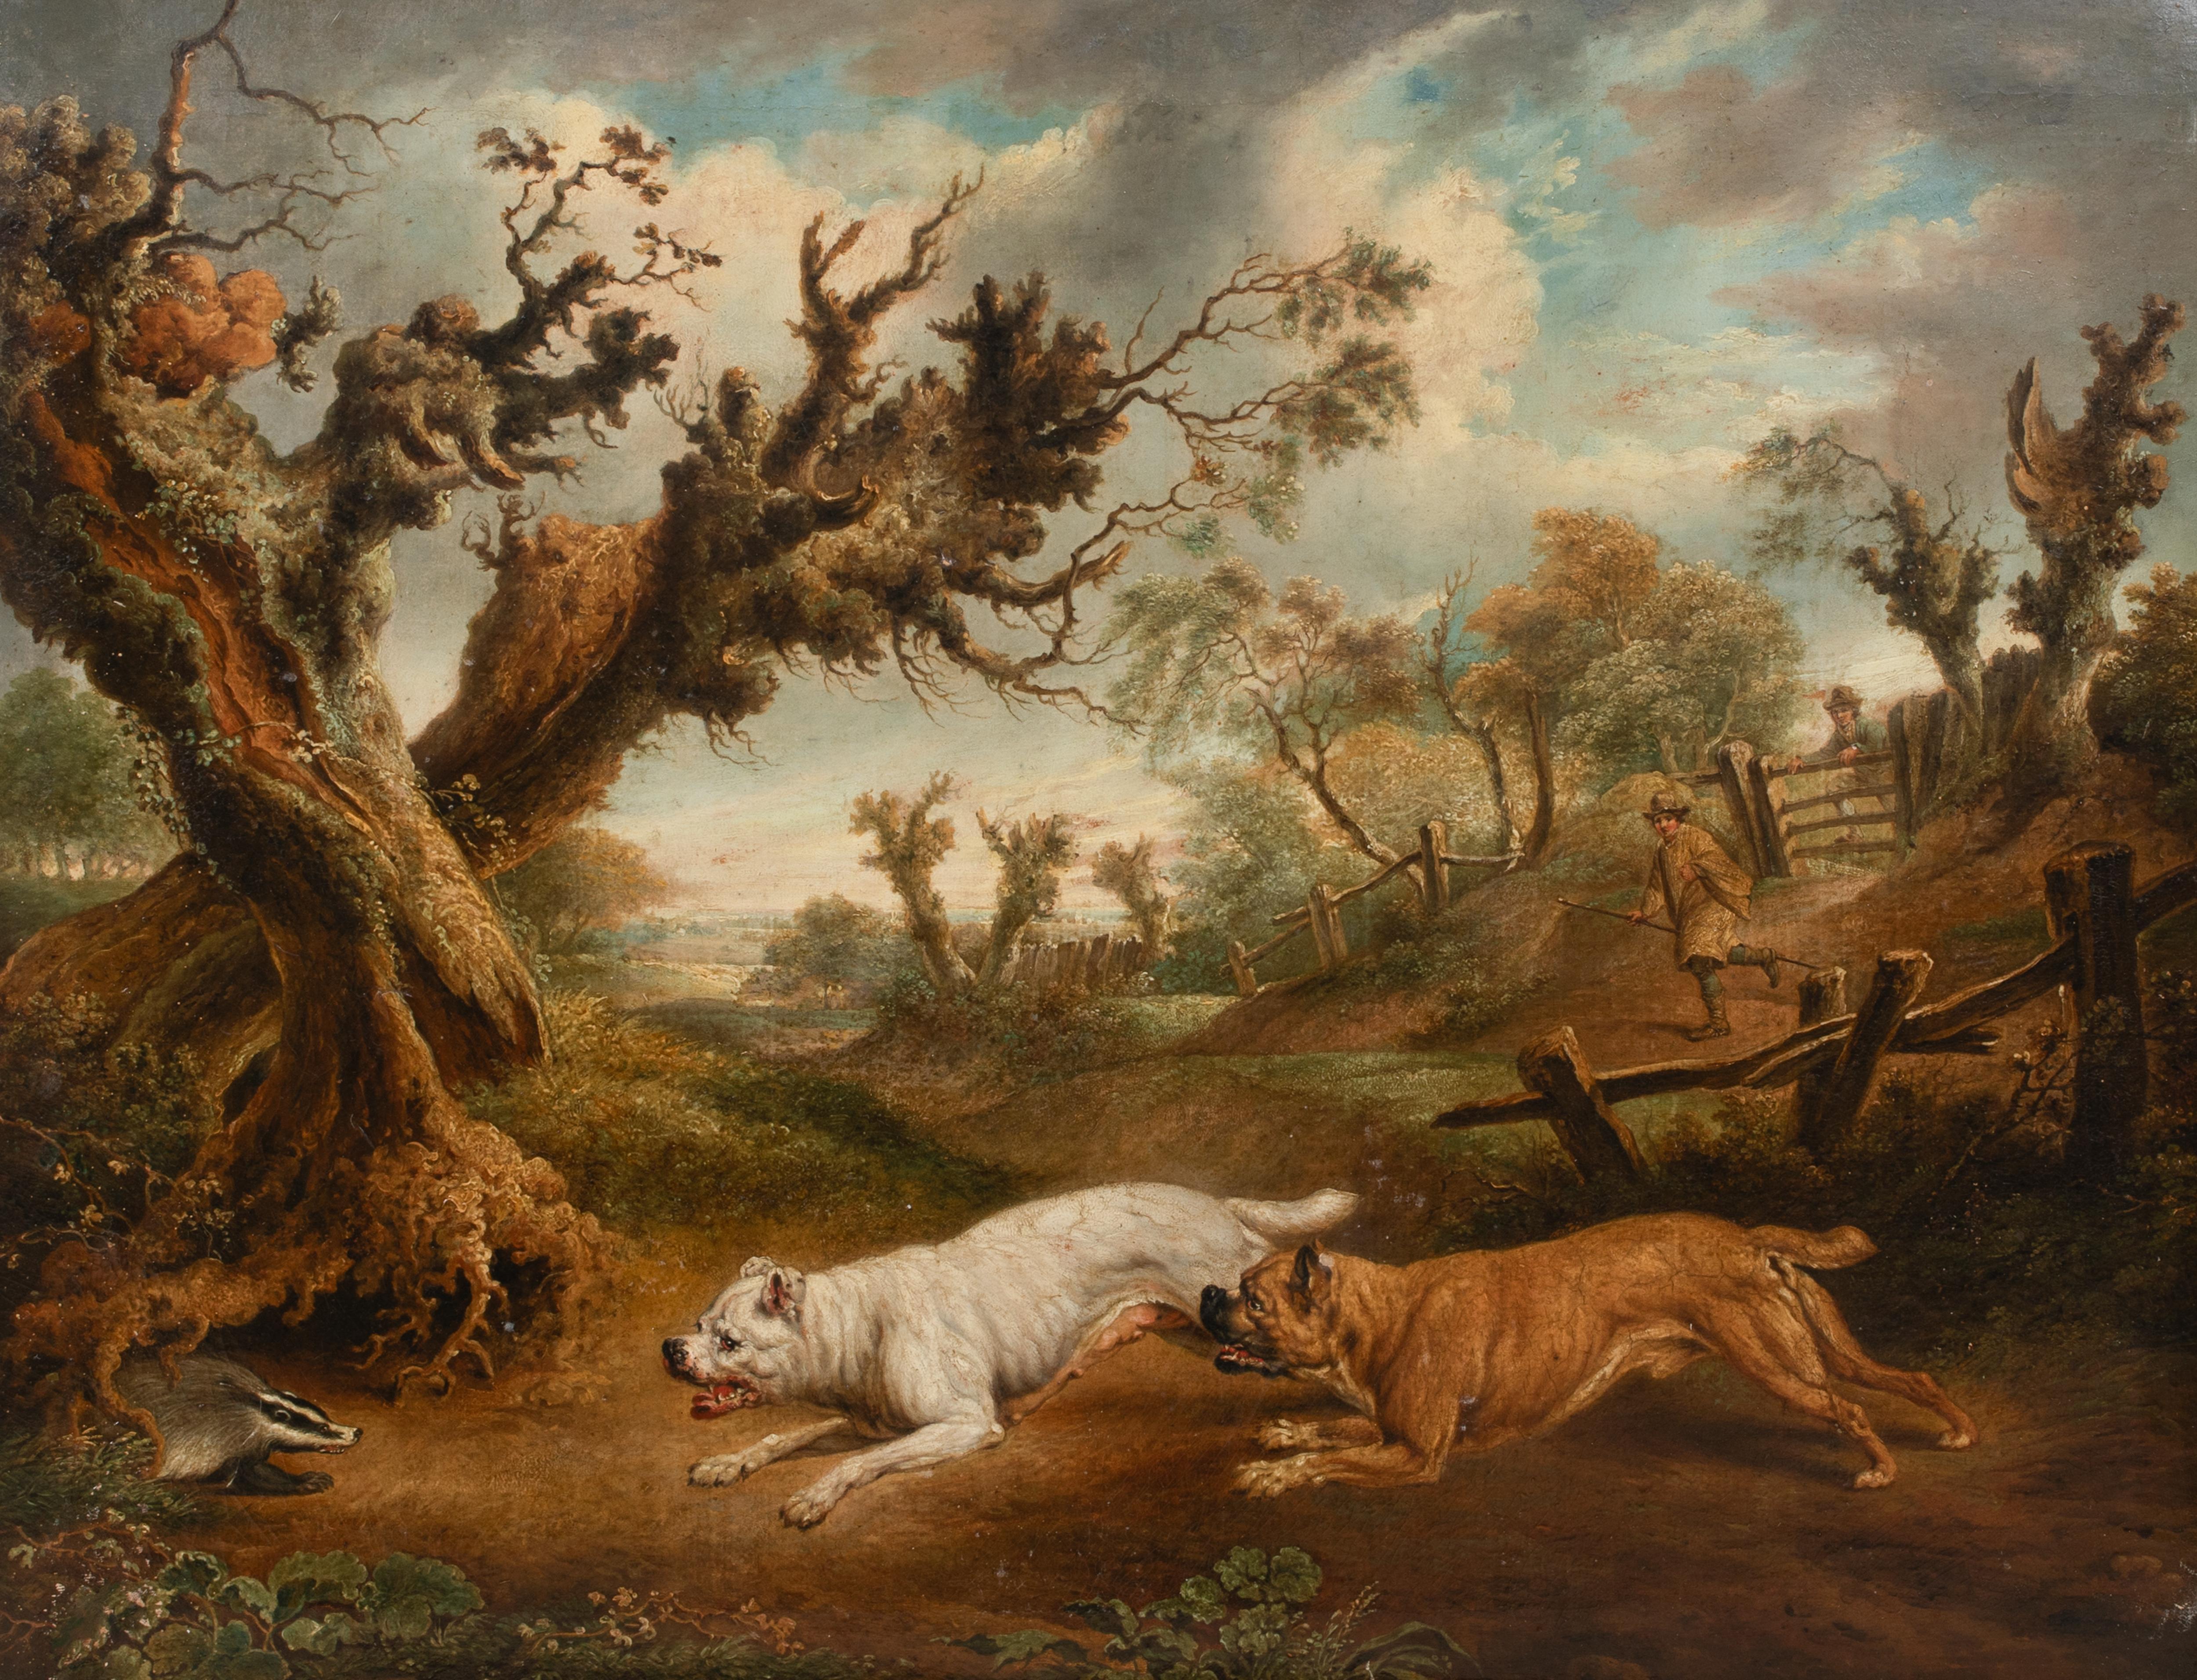 Bulldogs Hunting A Badger, 18th Century 

attributed to Charles TOWNE (1763-1840)

Large 18th Century English School hunting scene of Bulldogs Hunting a badger, oil on canvas laid to board attributed to Charles Towne. Excellent quality and condition